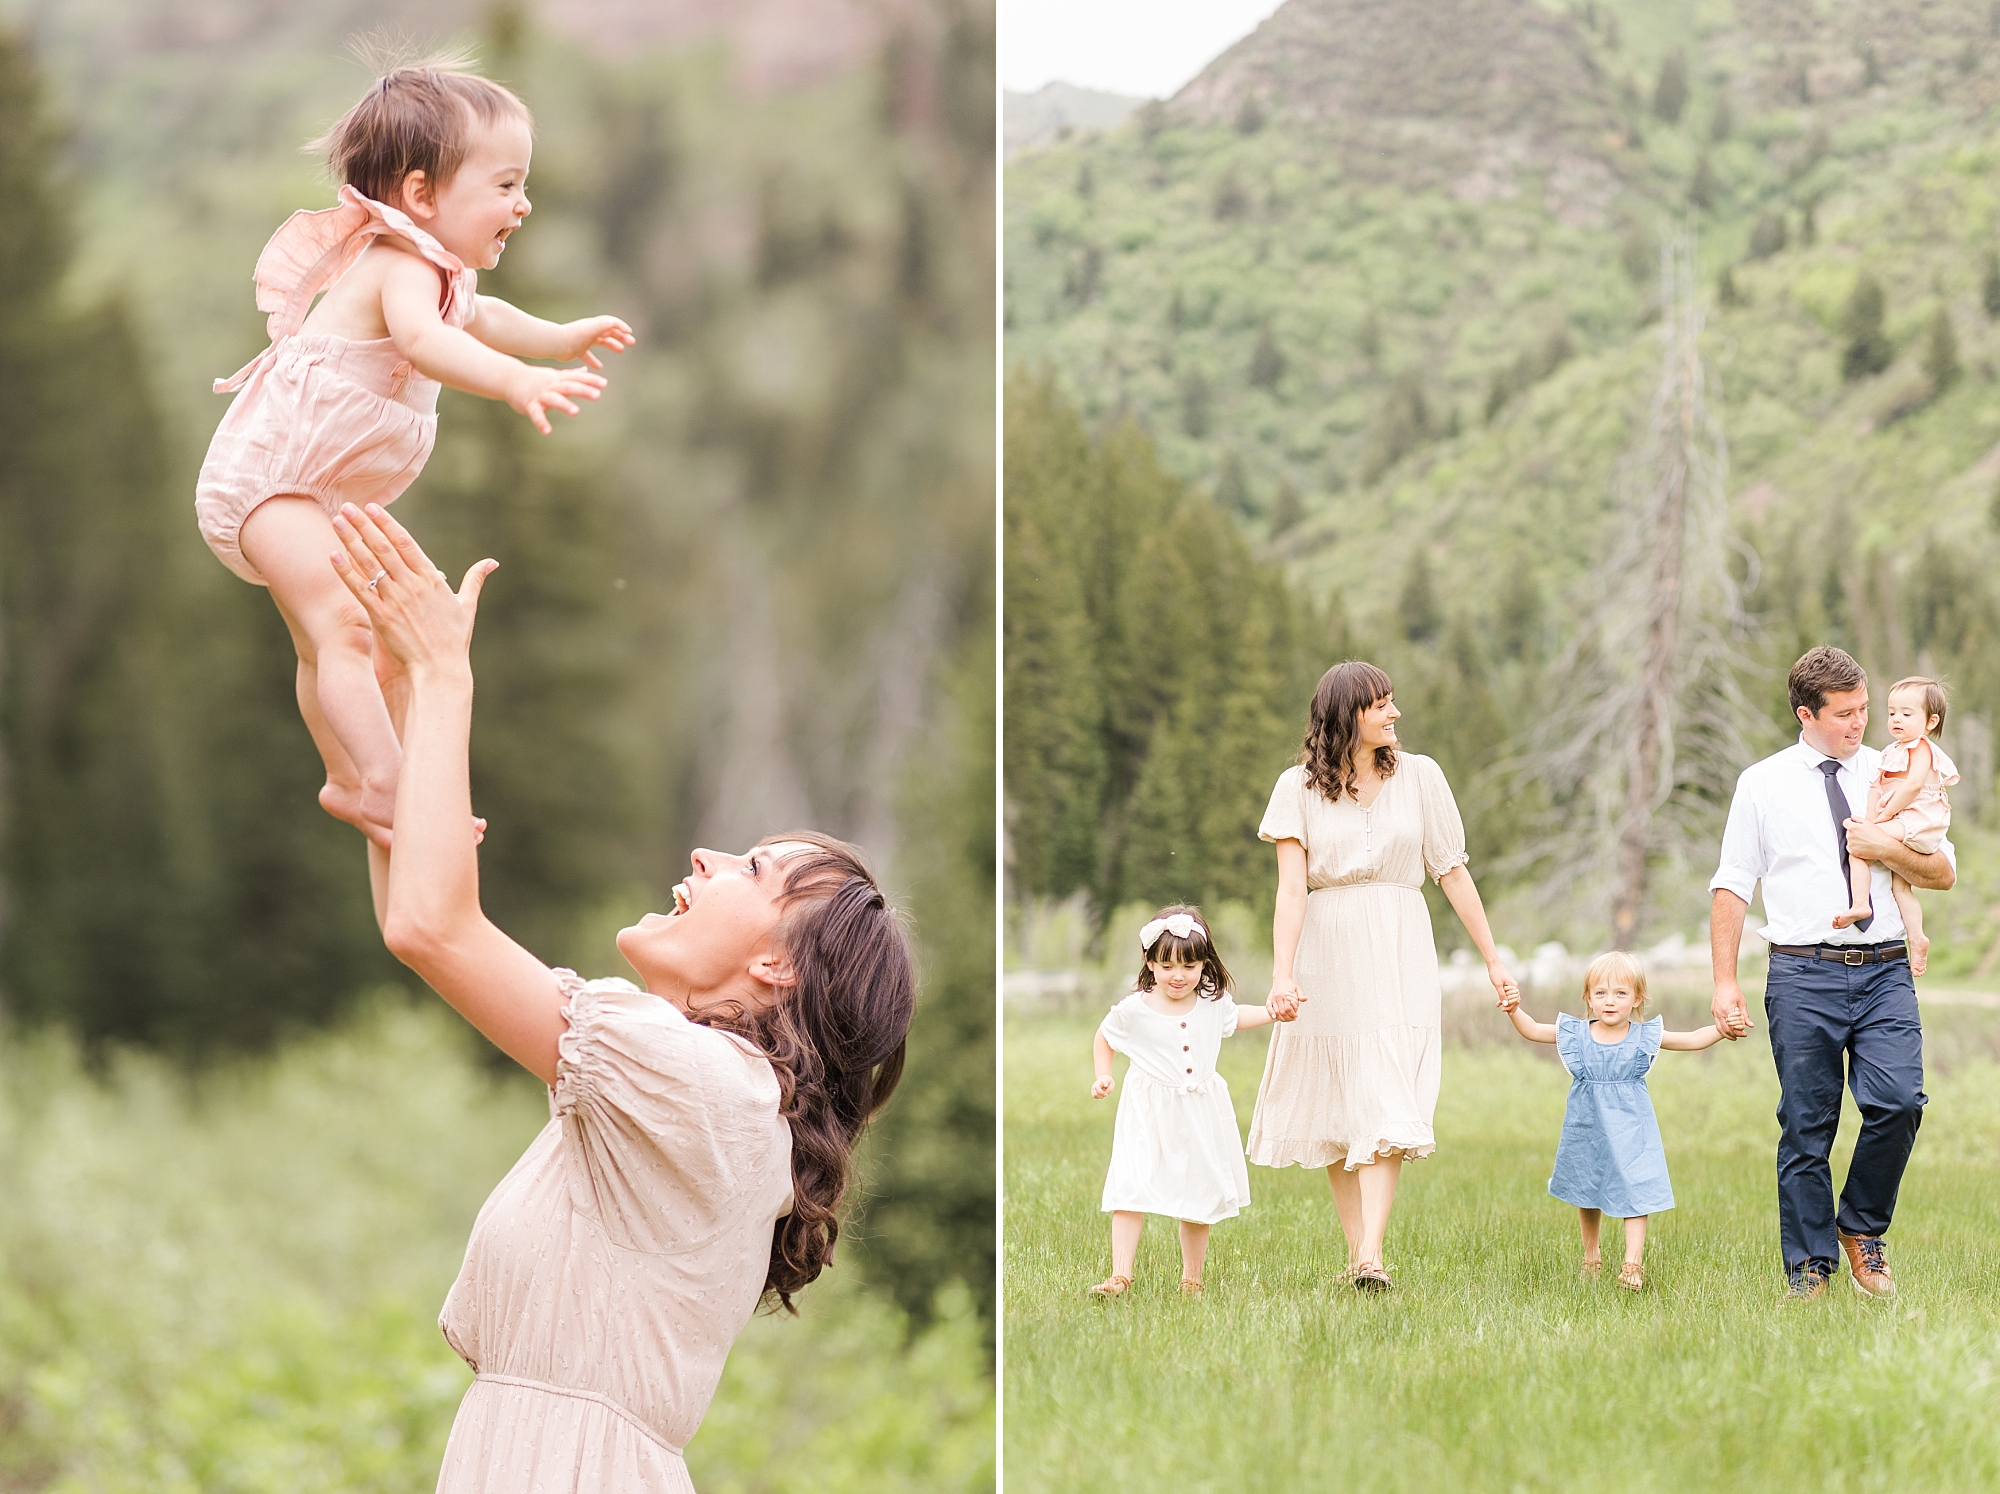 Outfit inspiration for your summer family session